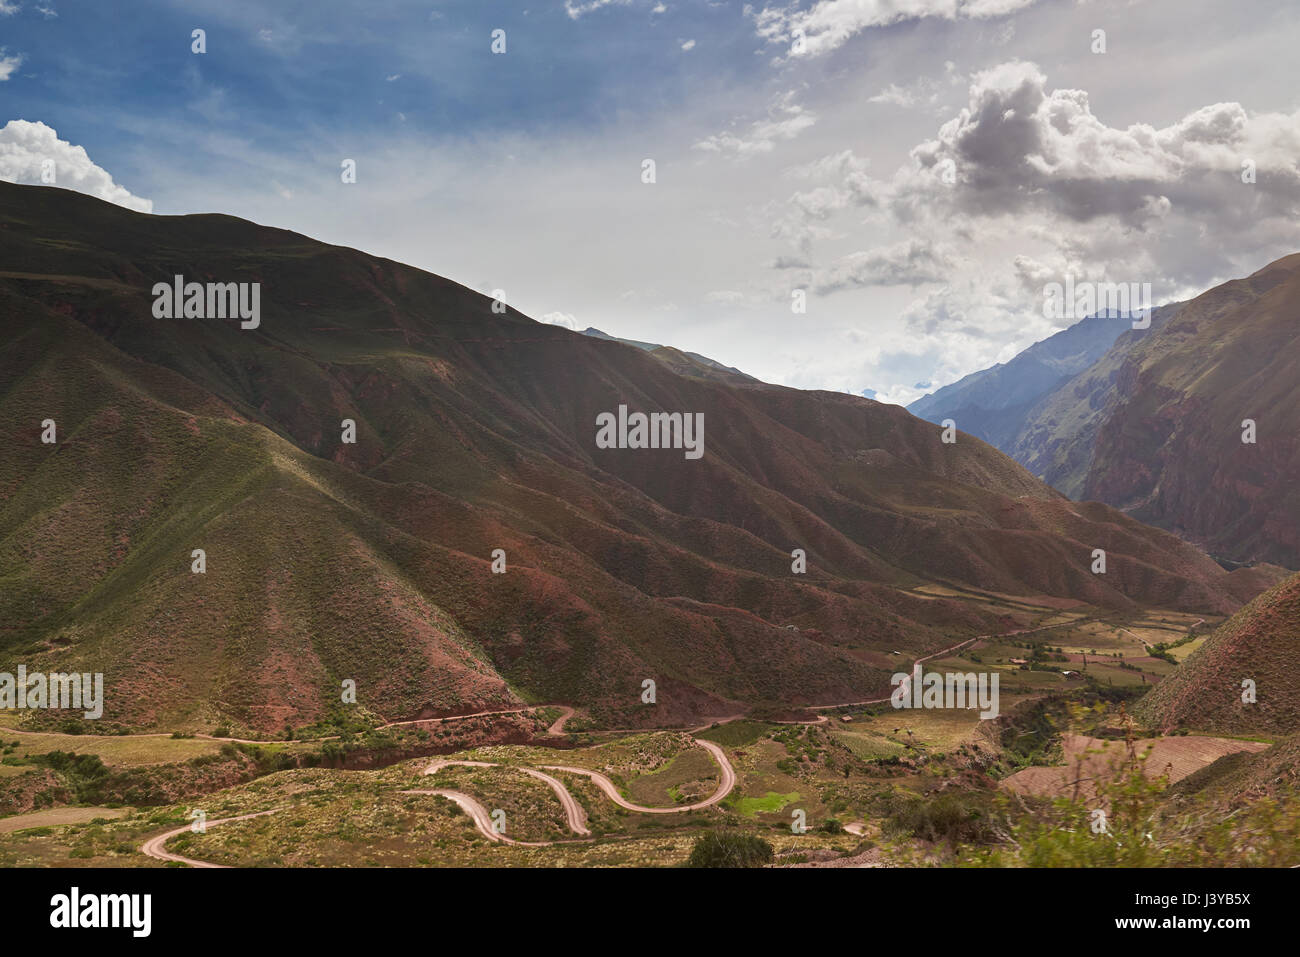 Andes mountain summer landscape in Peru. Mountain road on sunny day Stock Photo